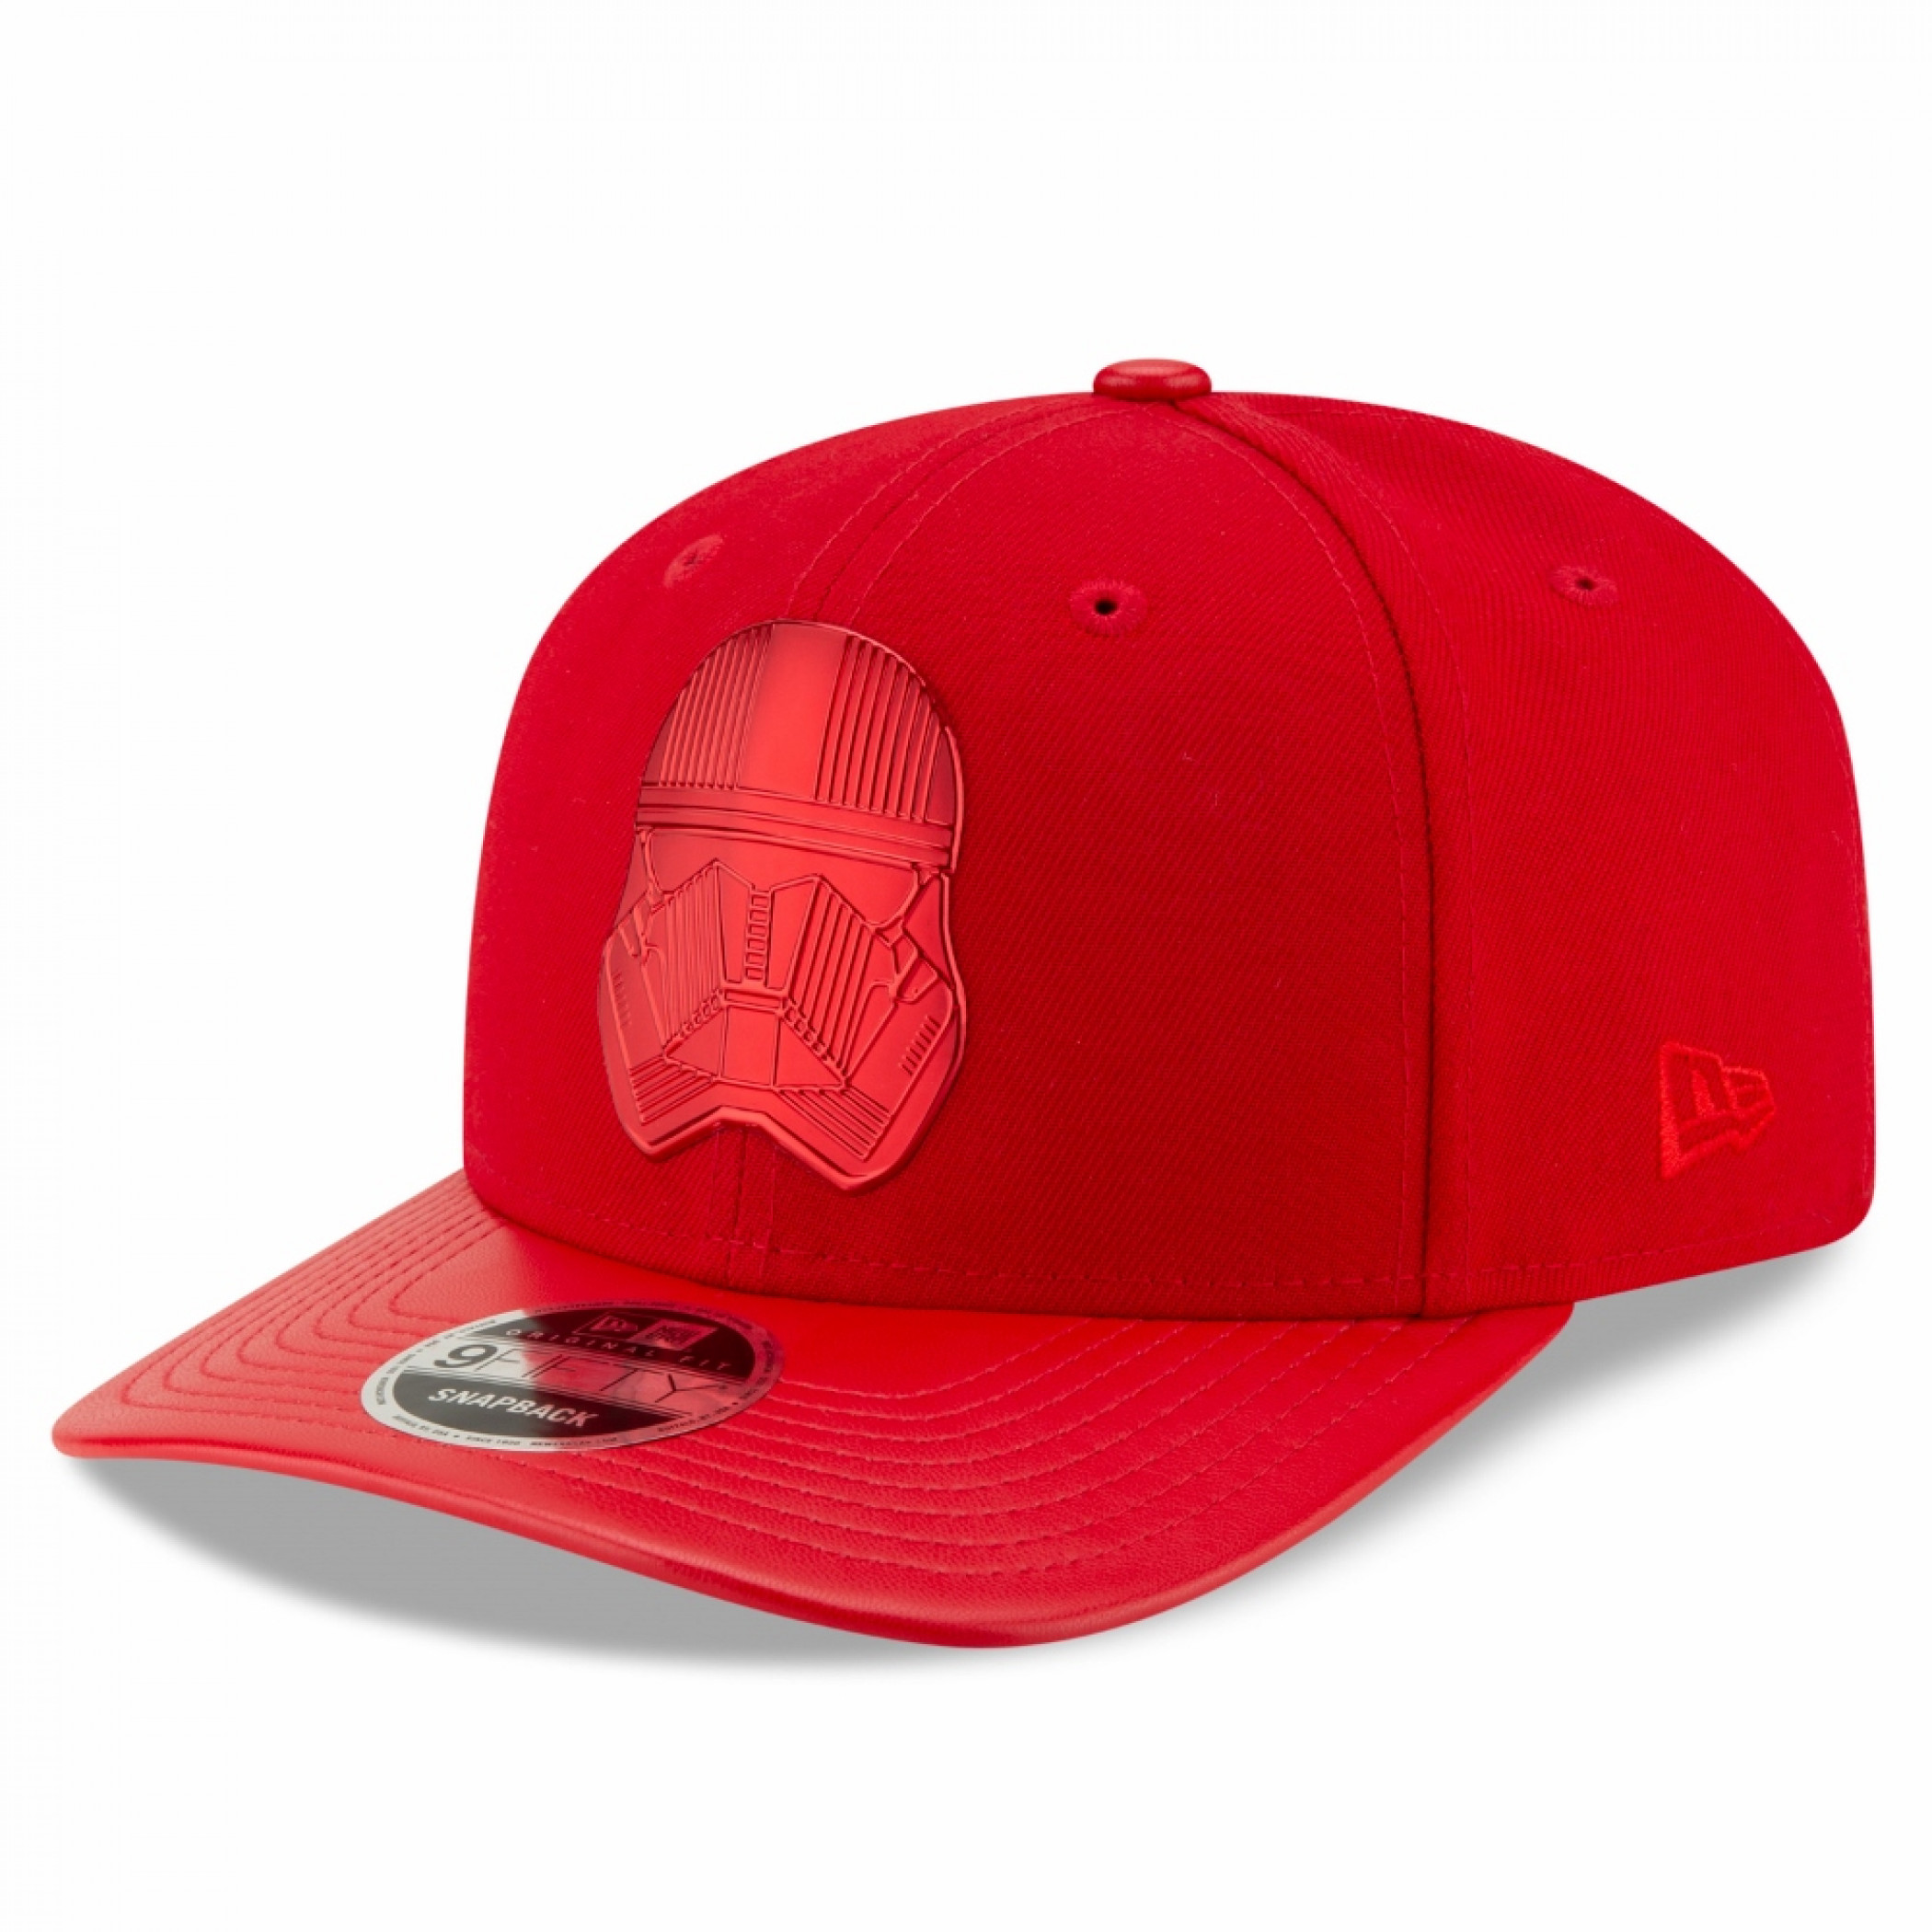 Star Wars Red Sith Troopers New Era 9Fifty Adjustable Hat